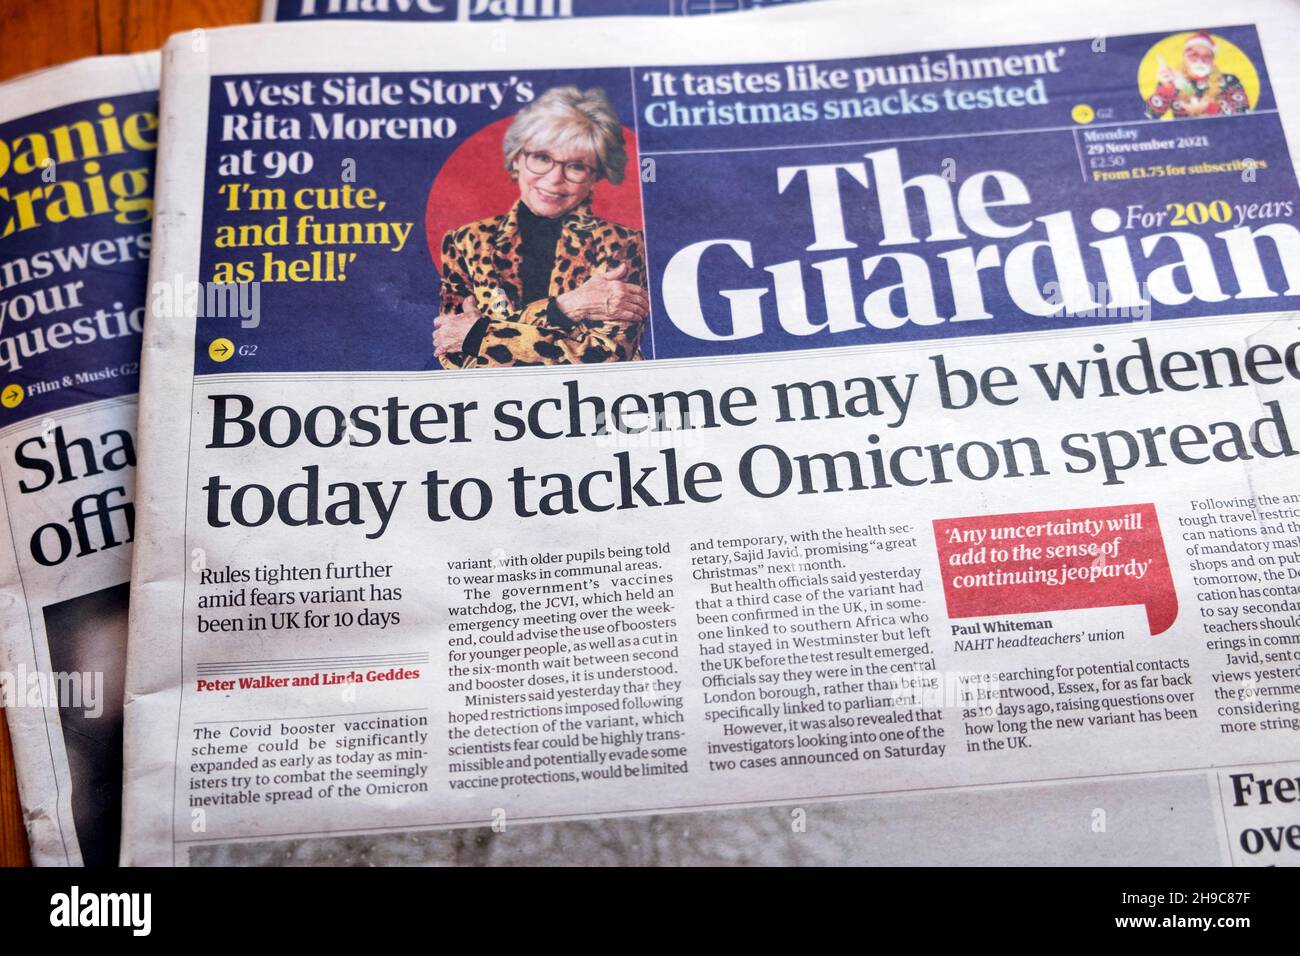 "Booster scheme may be widened today to tackle Omicron spread" Guardian newspaper headline Omicron covid on front page 29 November 2021 in London UK Stock Photo